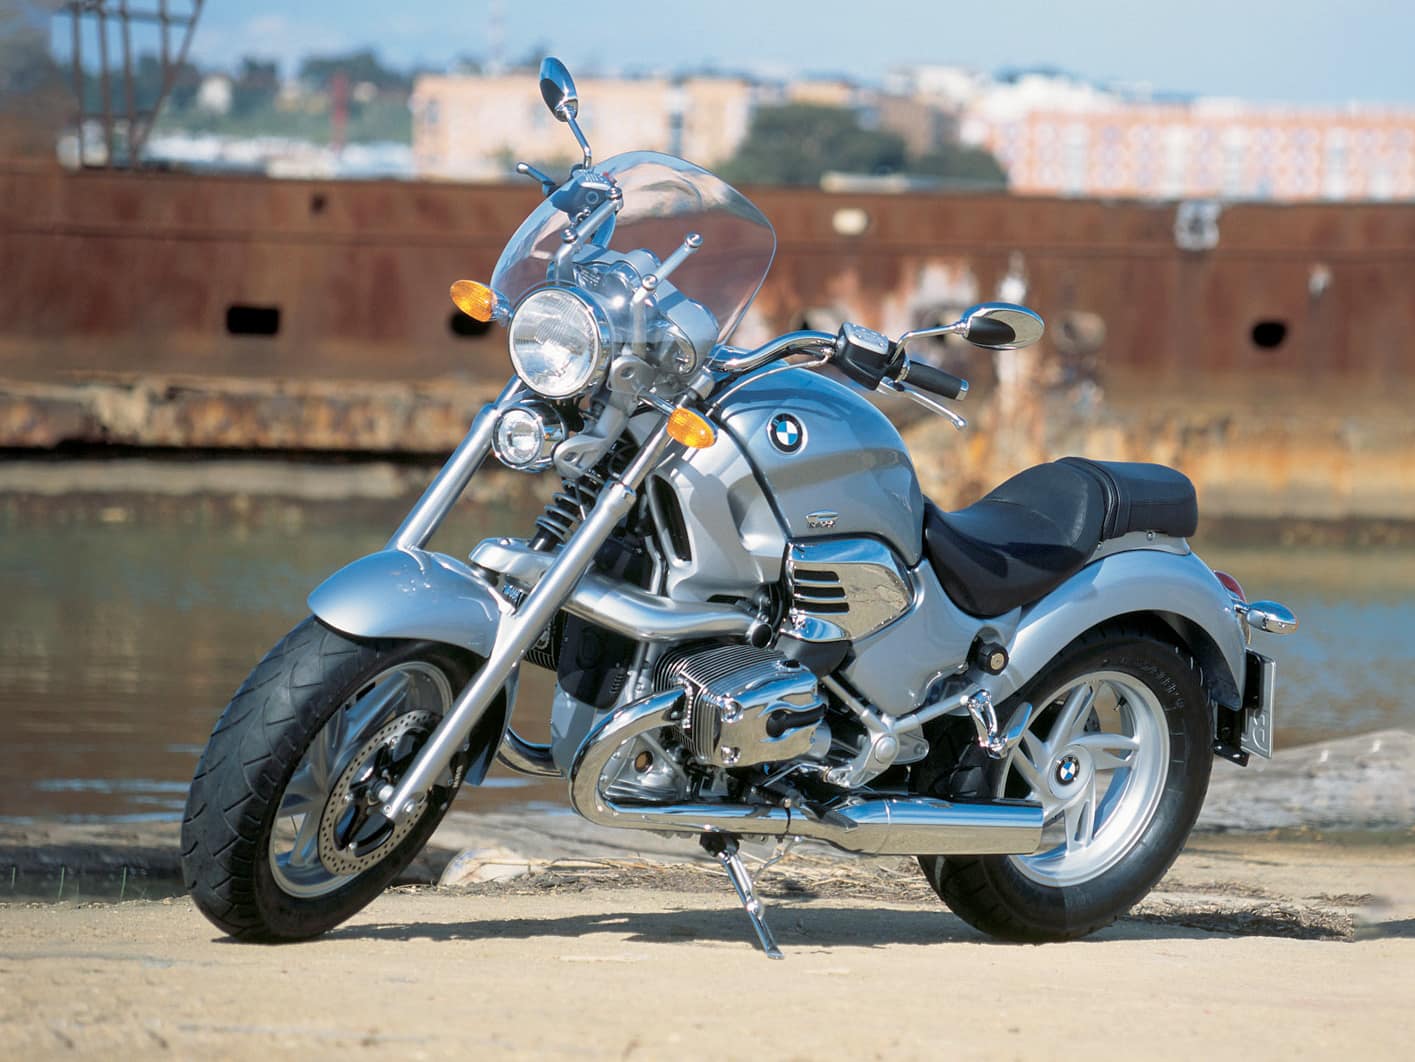 BMW R 1200 C Buyers Guide — The First BMW Cruiser